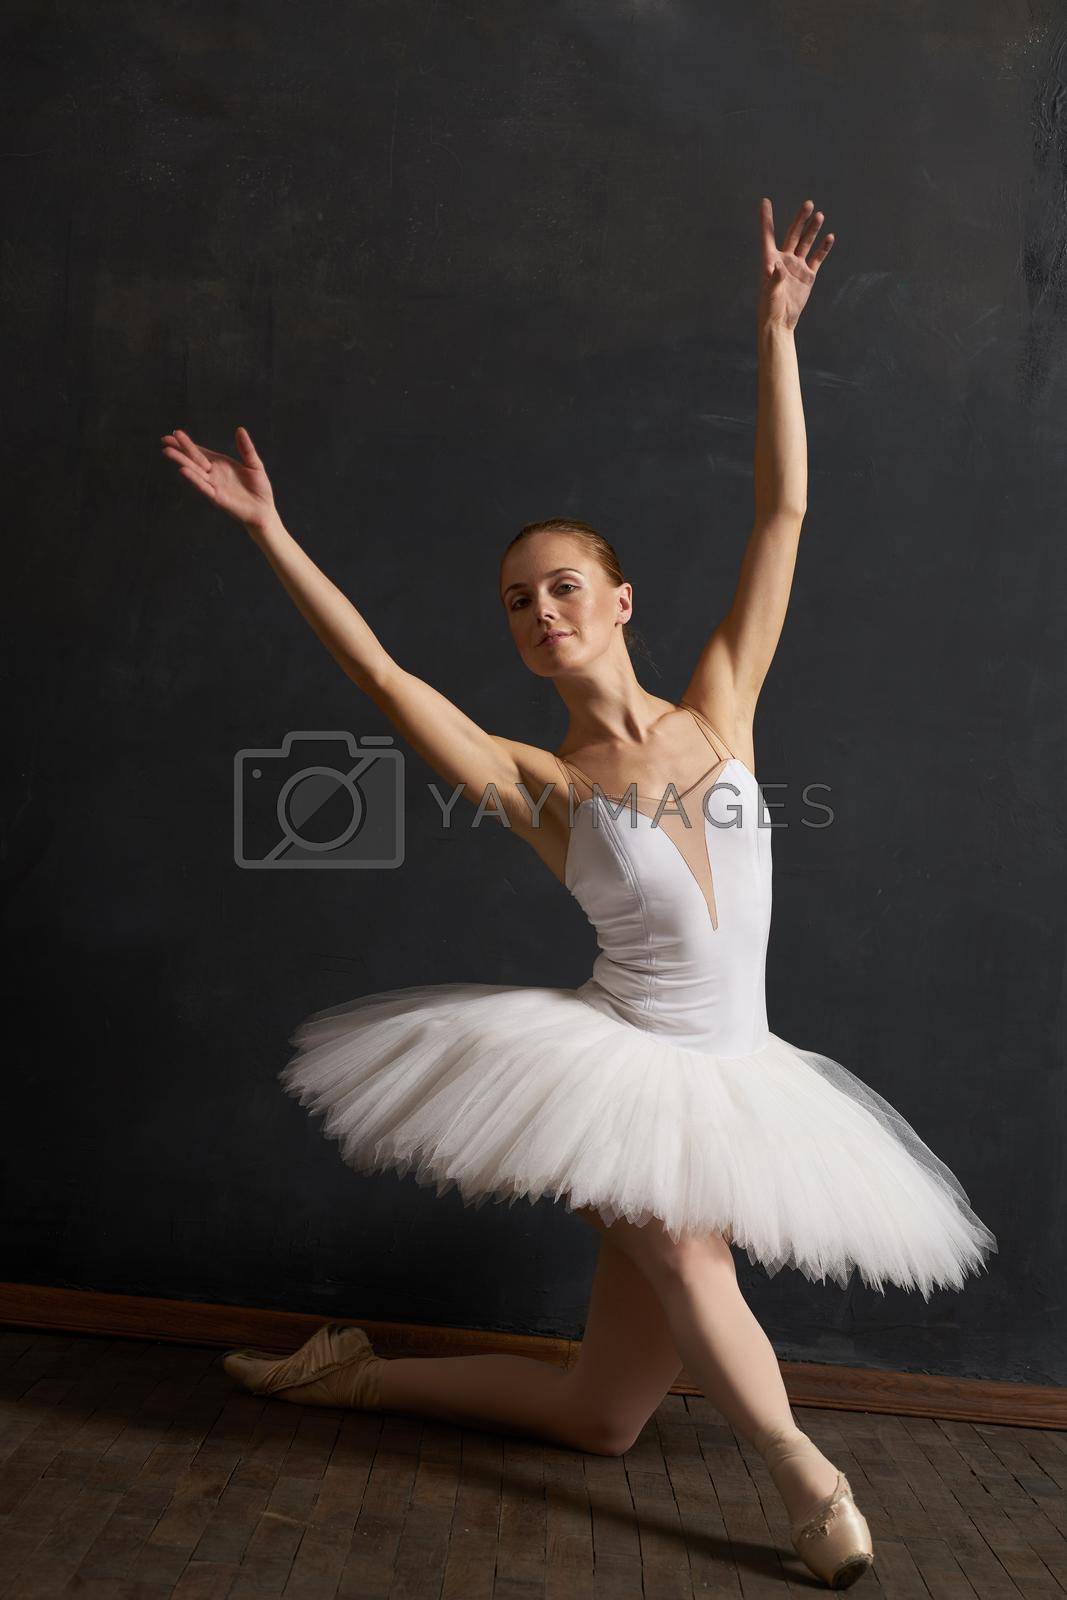 Royalty free image of woman ballerina in white tutu performance grace dance by Vichizh